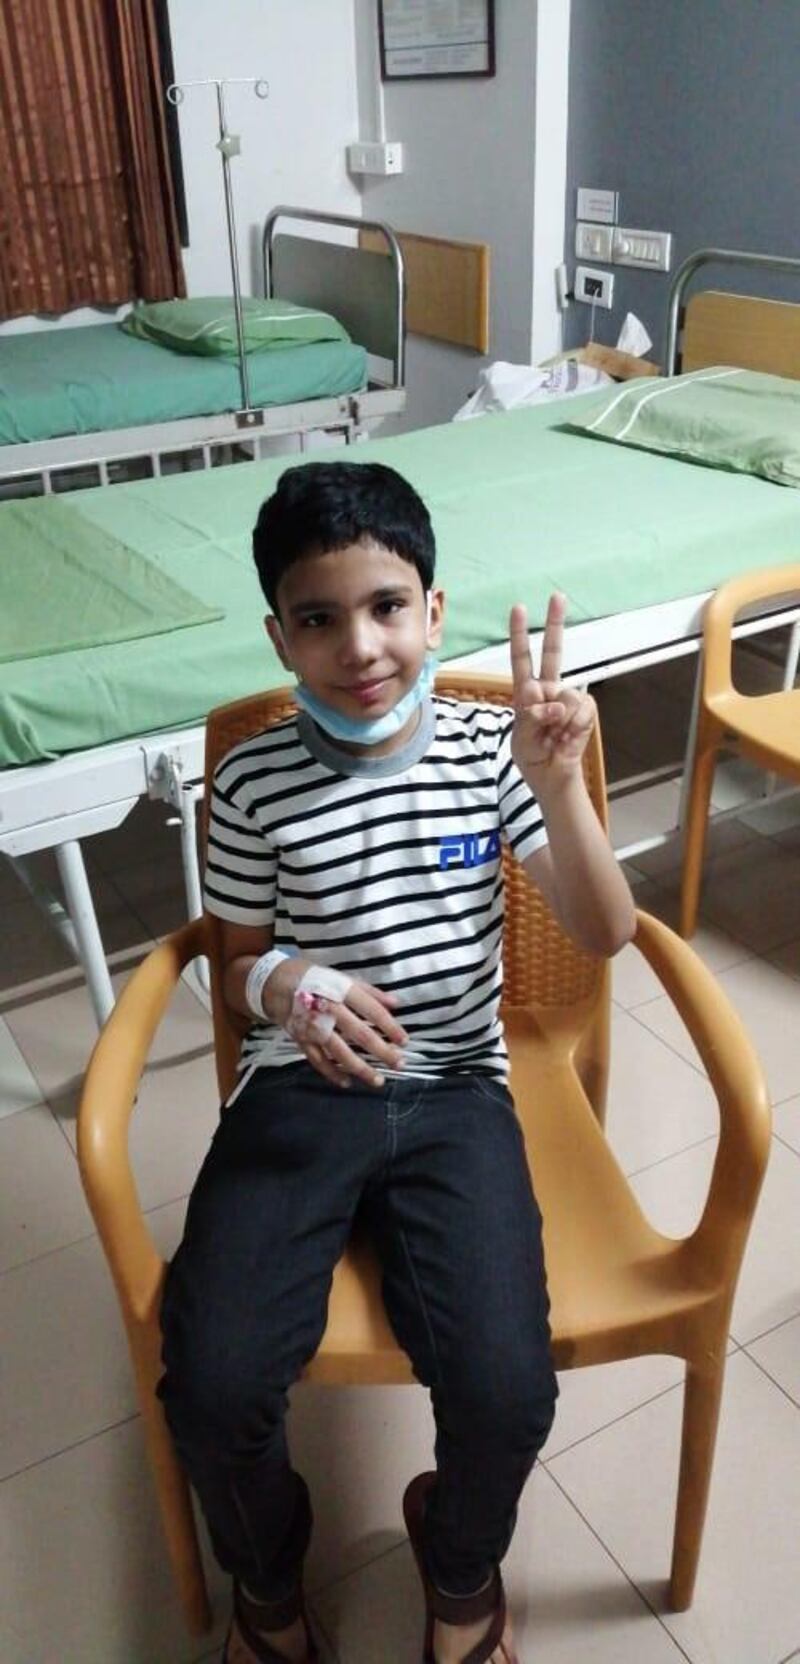 Mohamed Zishan is recovering from a head injury and is among more than 100 survivors of a plane crash in southern India. The nine-year-old was travelling from Dubai with his siblings and mother when an Air India Express aircraft crashed in Kozhikode, Kerala killing 18 passengers including two pilots. Courtesy: Sulfikar Ali